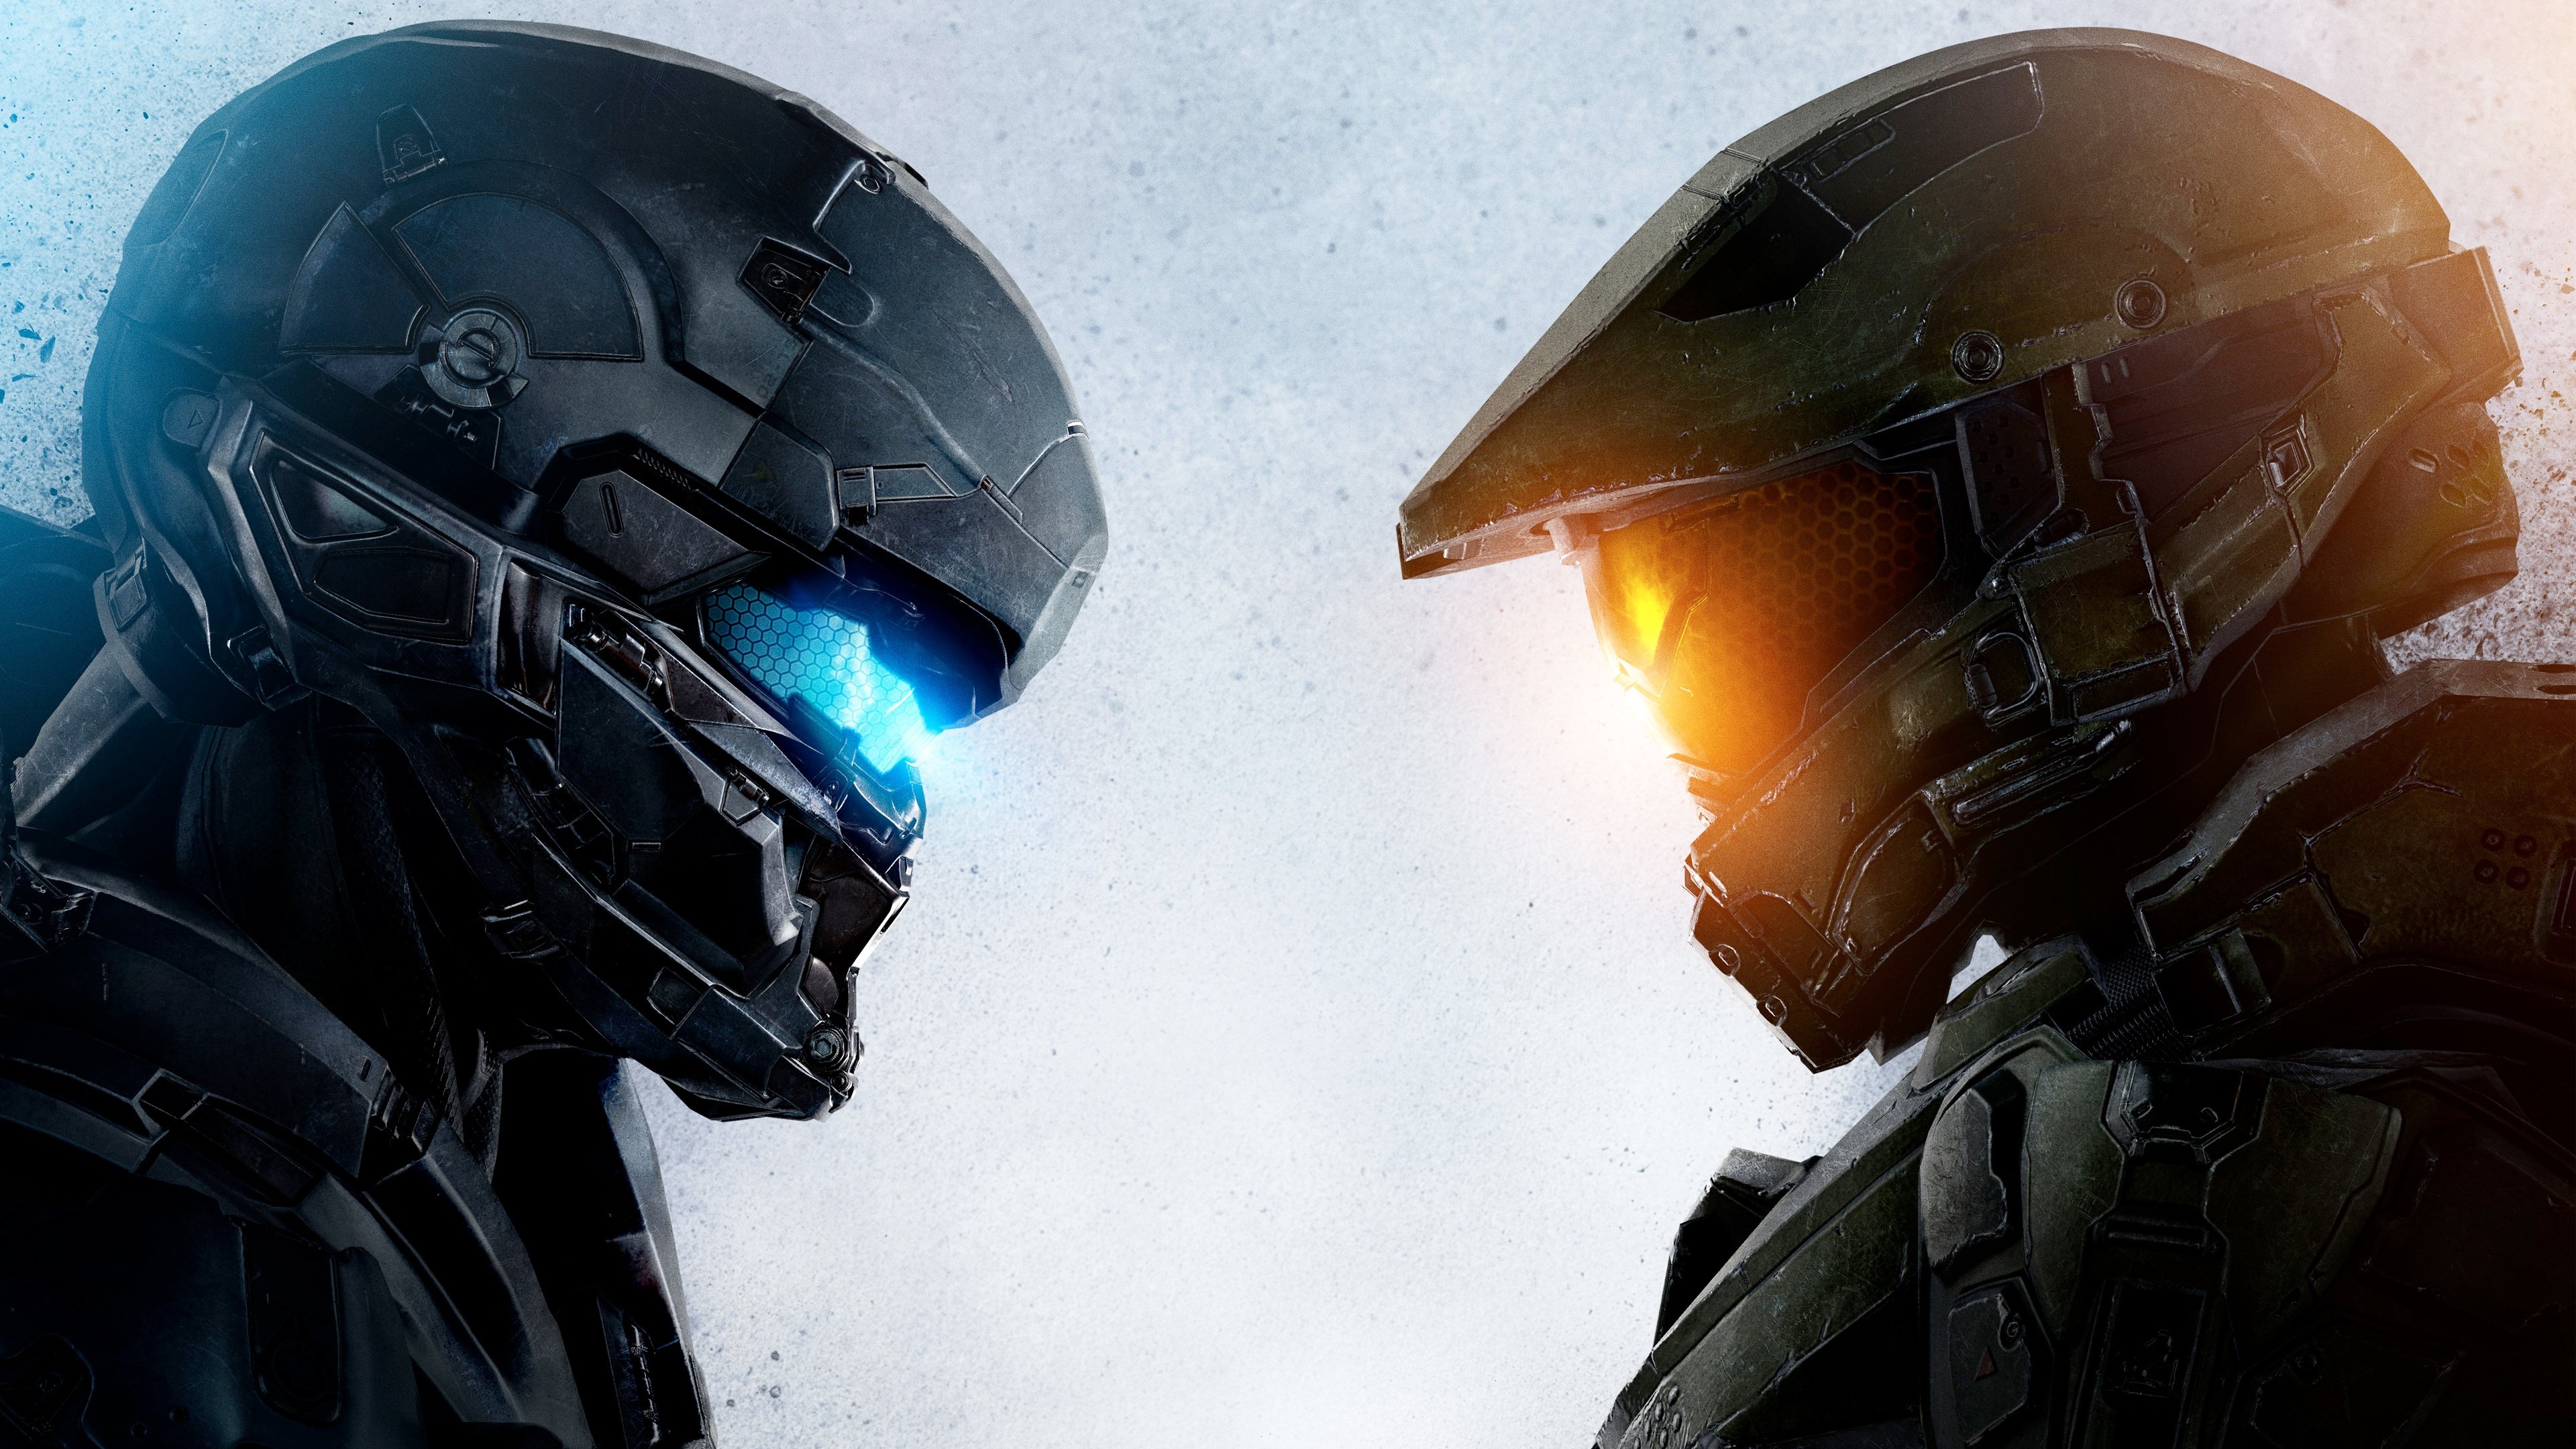 2015 Halo 5 Guardians Wallpapers HD Wallpapers 3840x2160